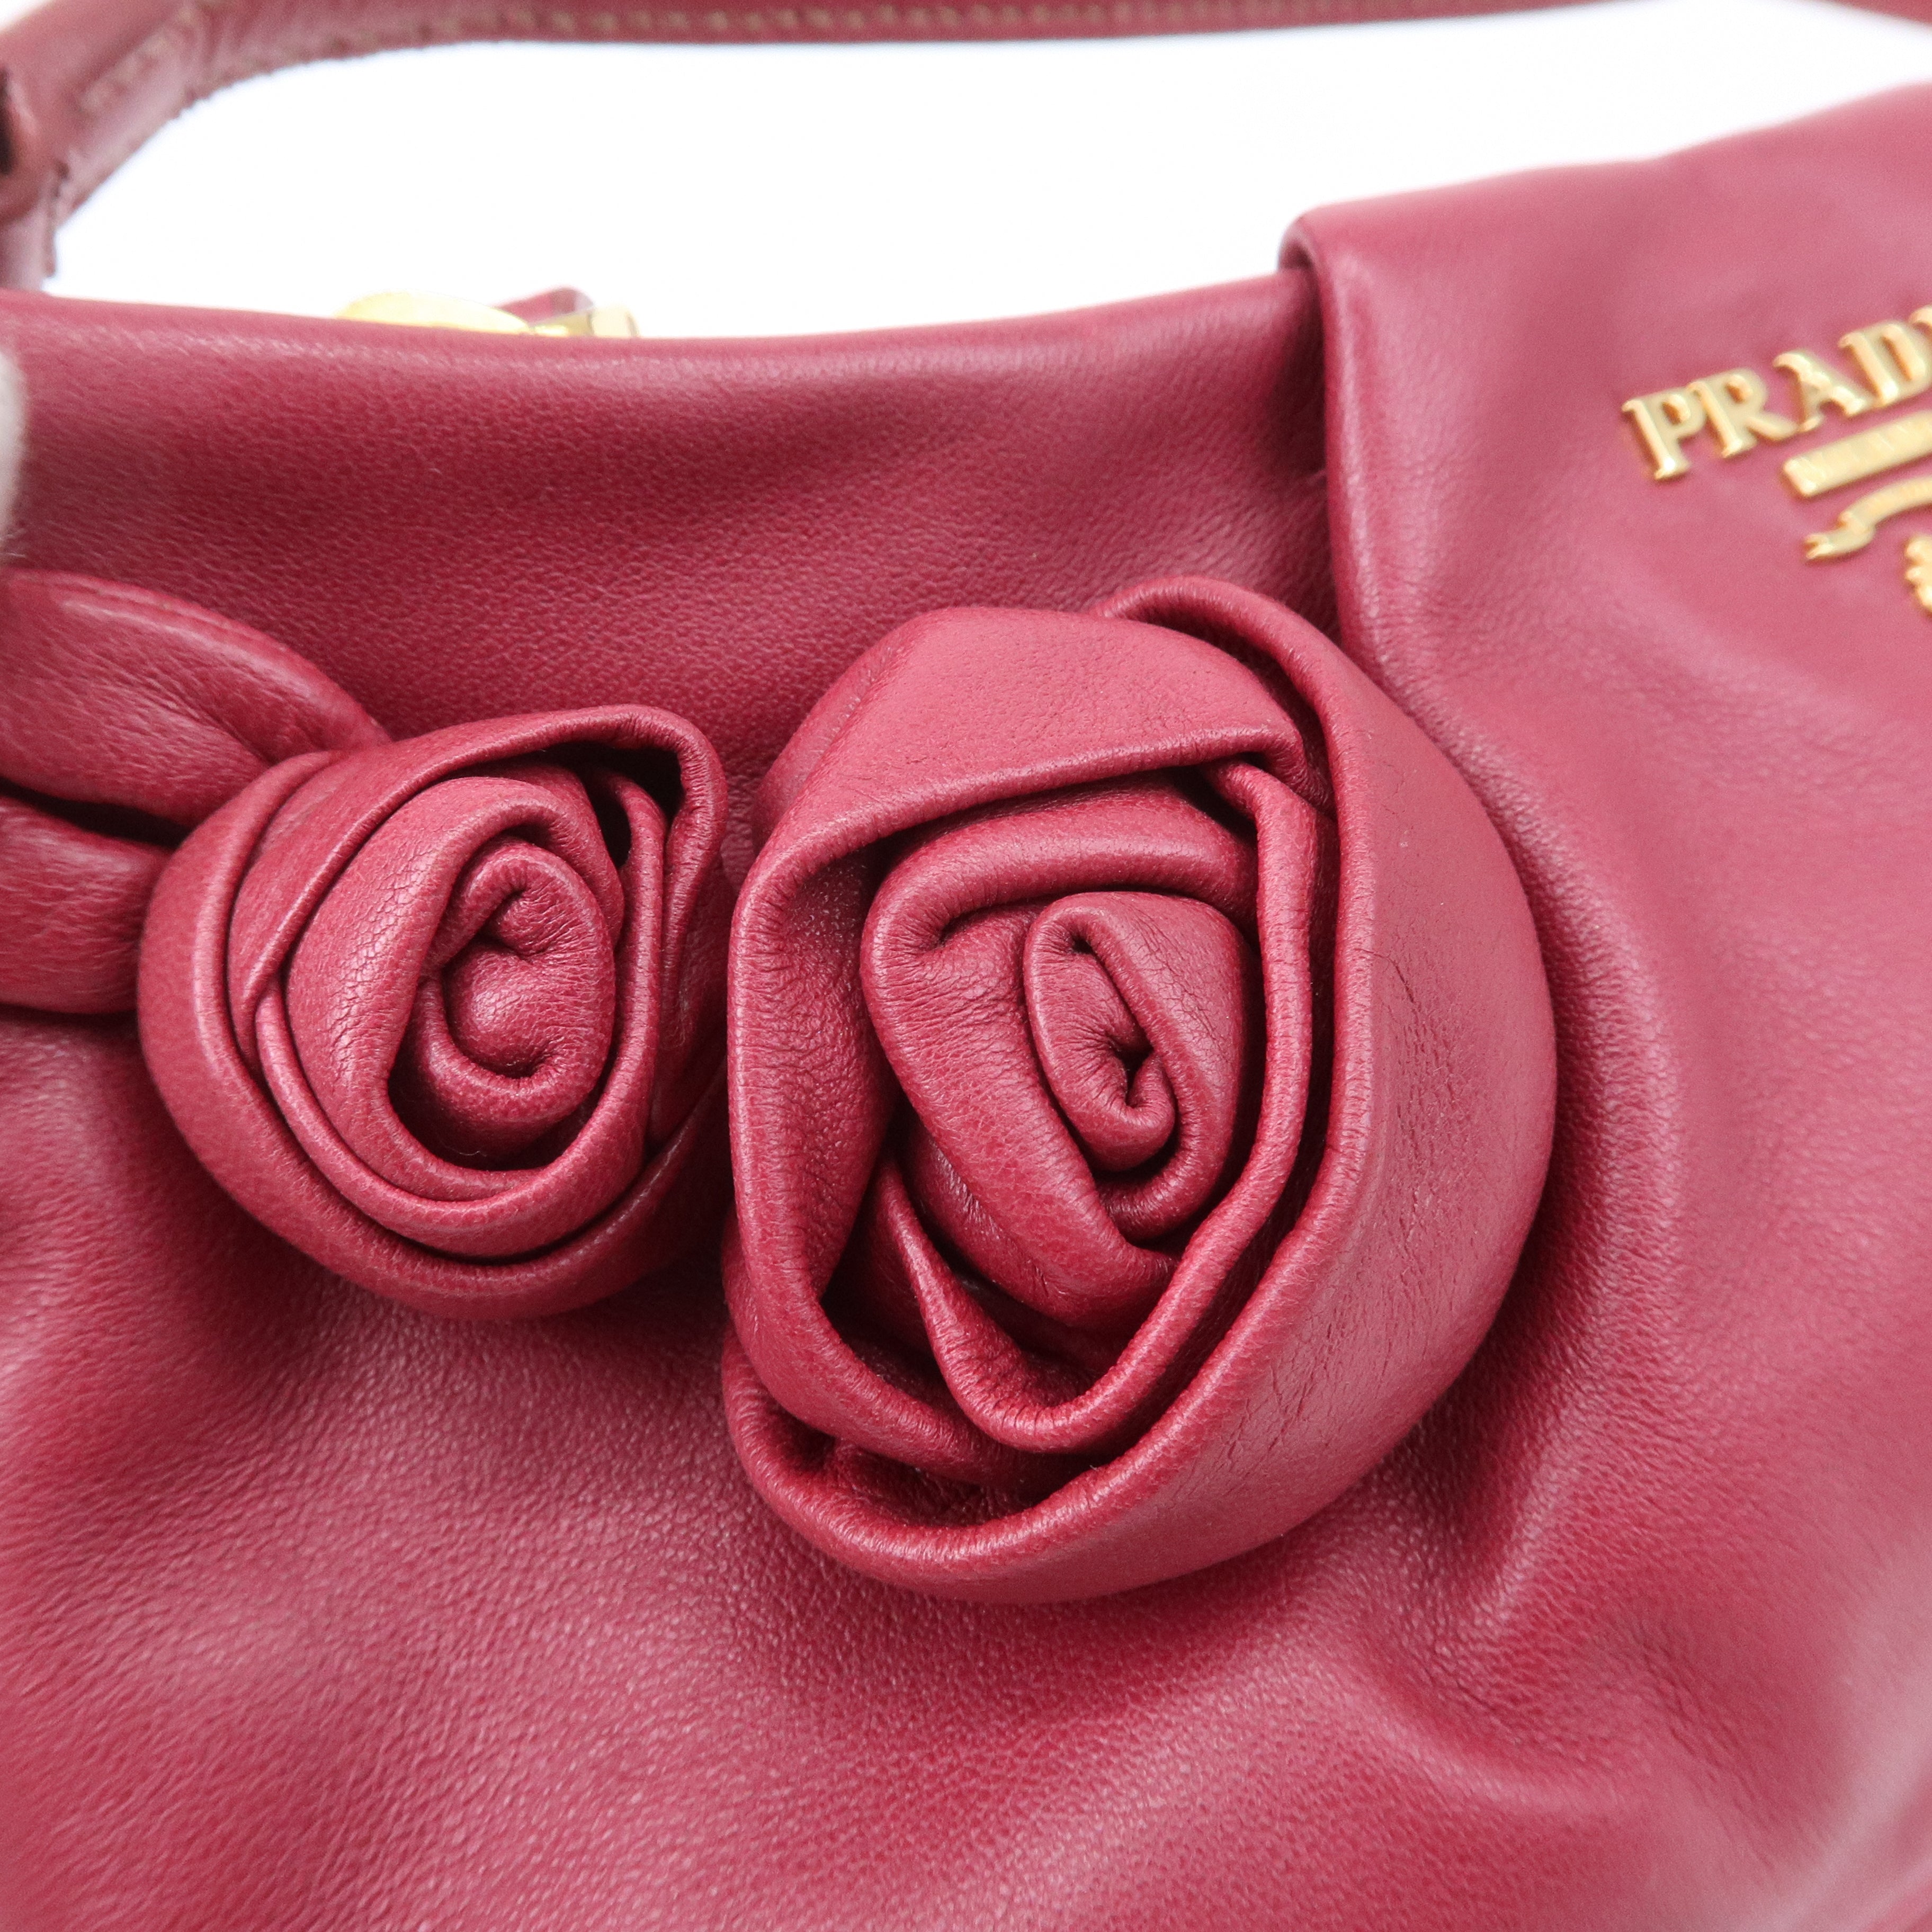 PRADA-Leather-Rose-Corsage-Hand-Bag-Pouch-Pink-1N1439 – dct